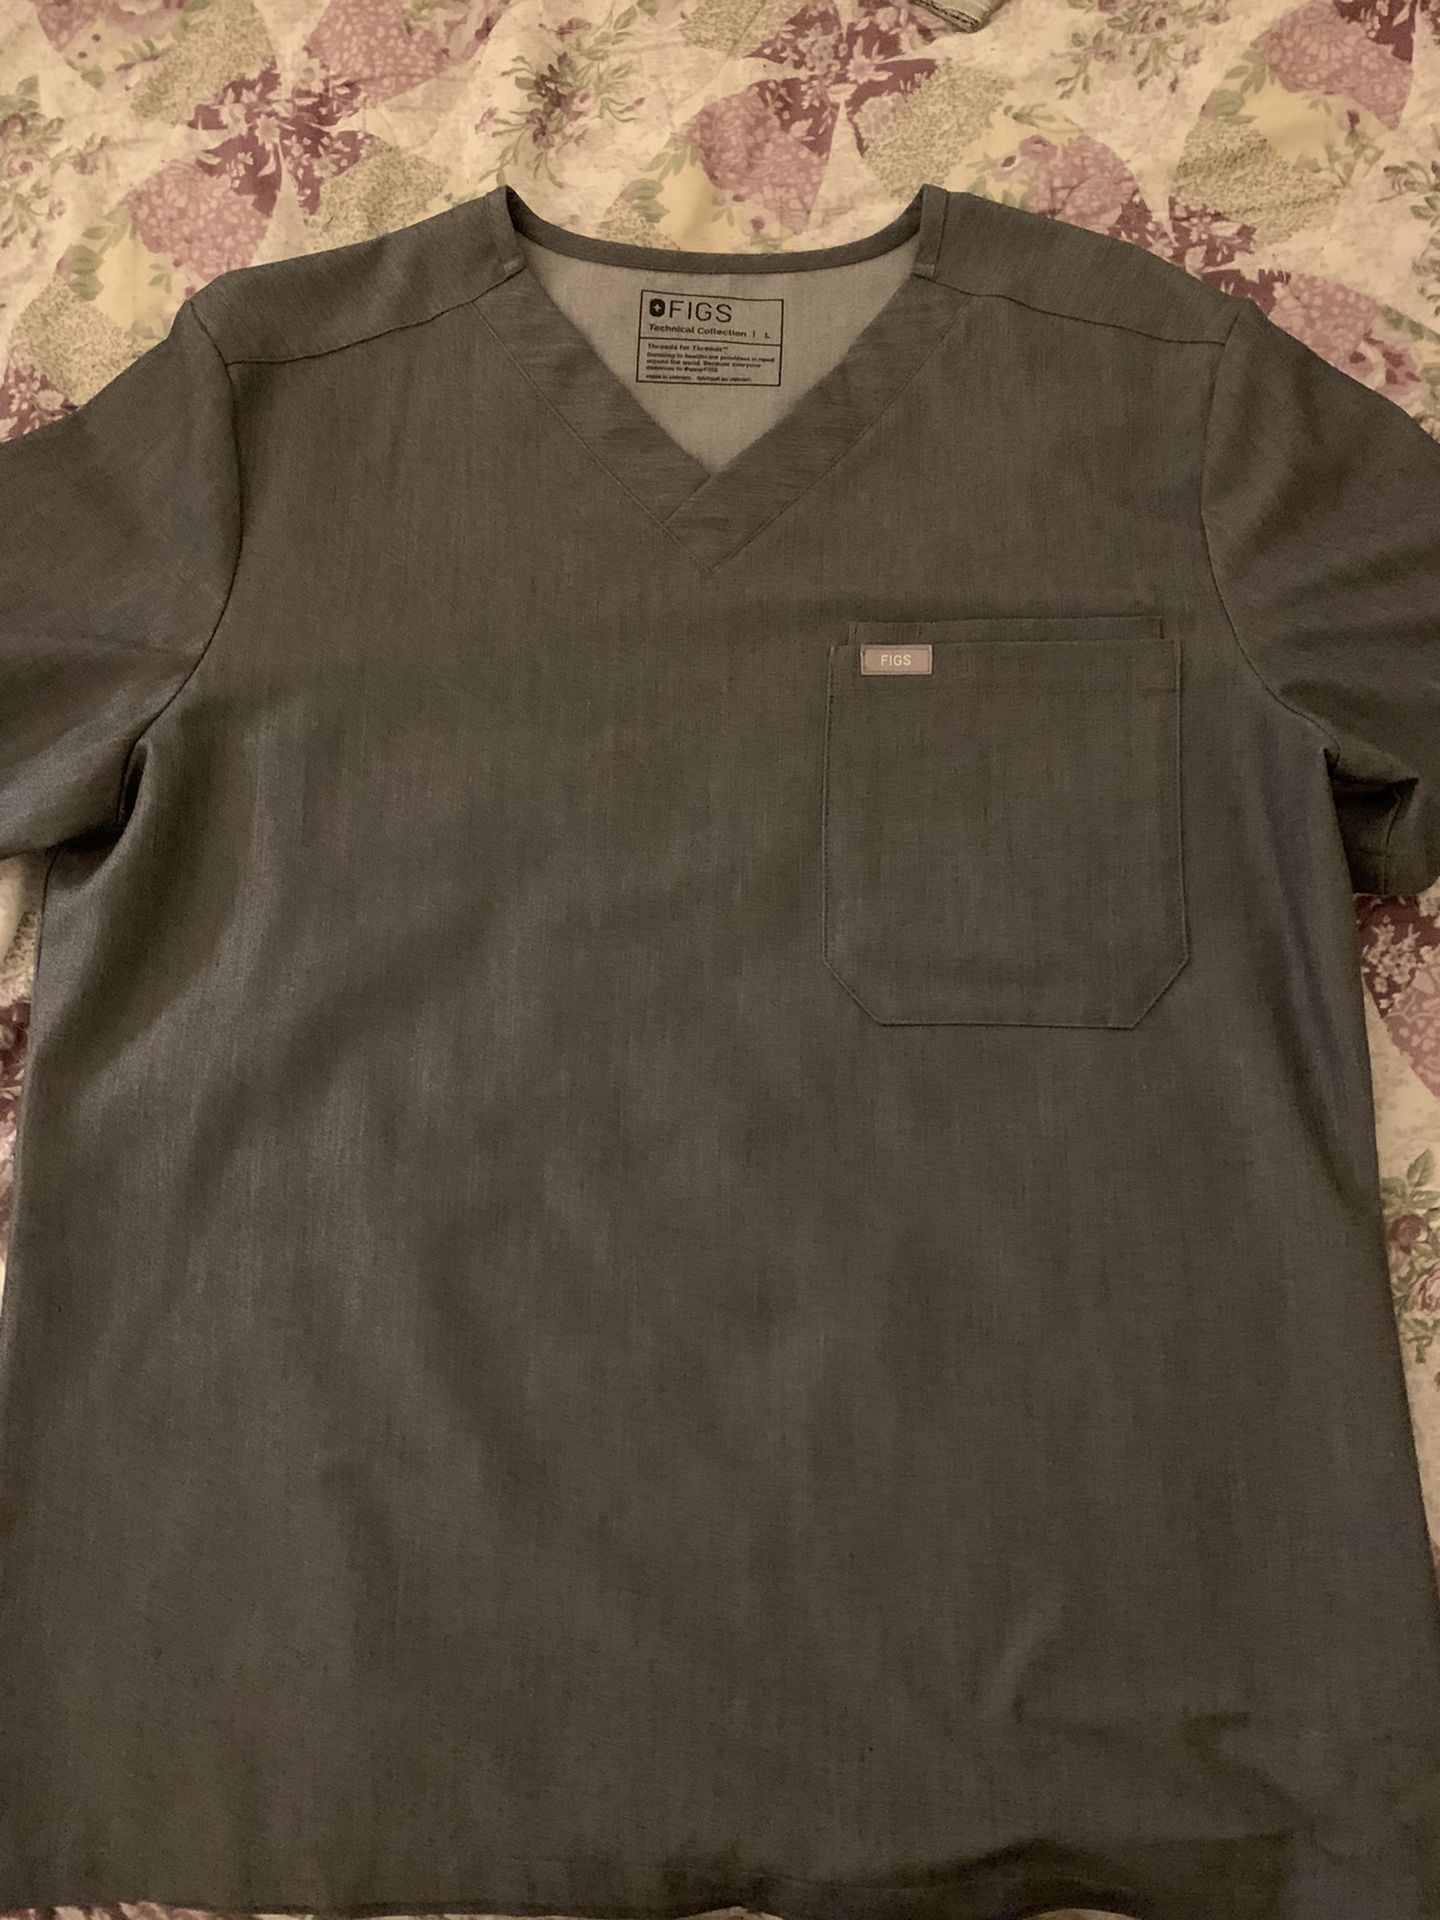 L arge size, Scrub Suit,(top Only) Color Gray.  FIGS